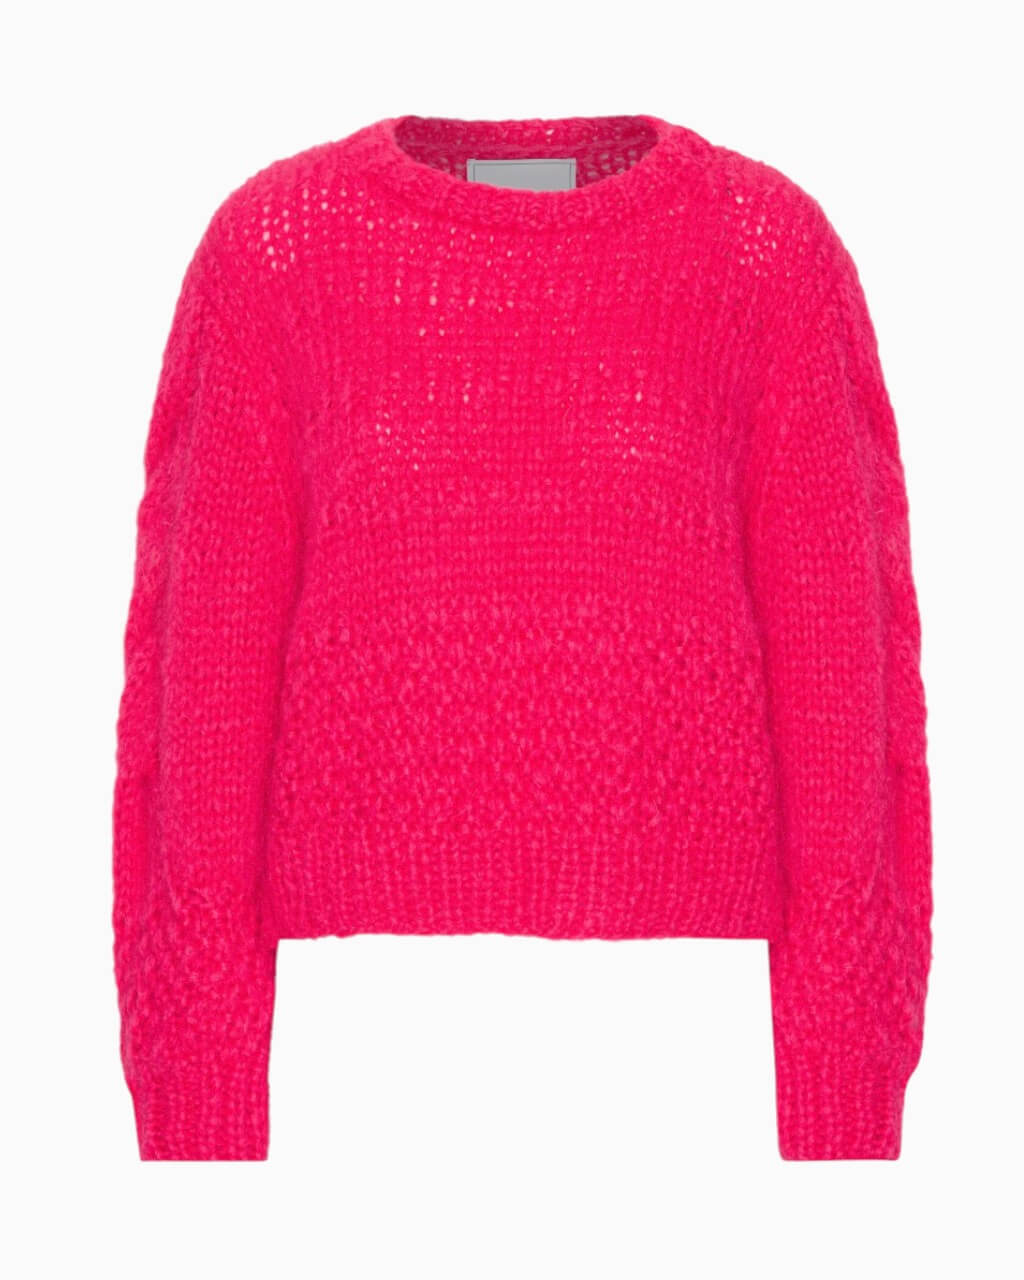 DAWN & DARE - Wilma Pink Pullover | Pink